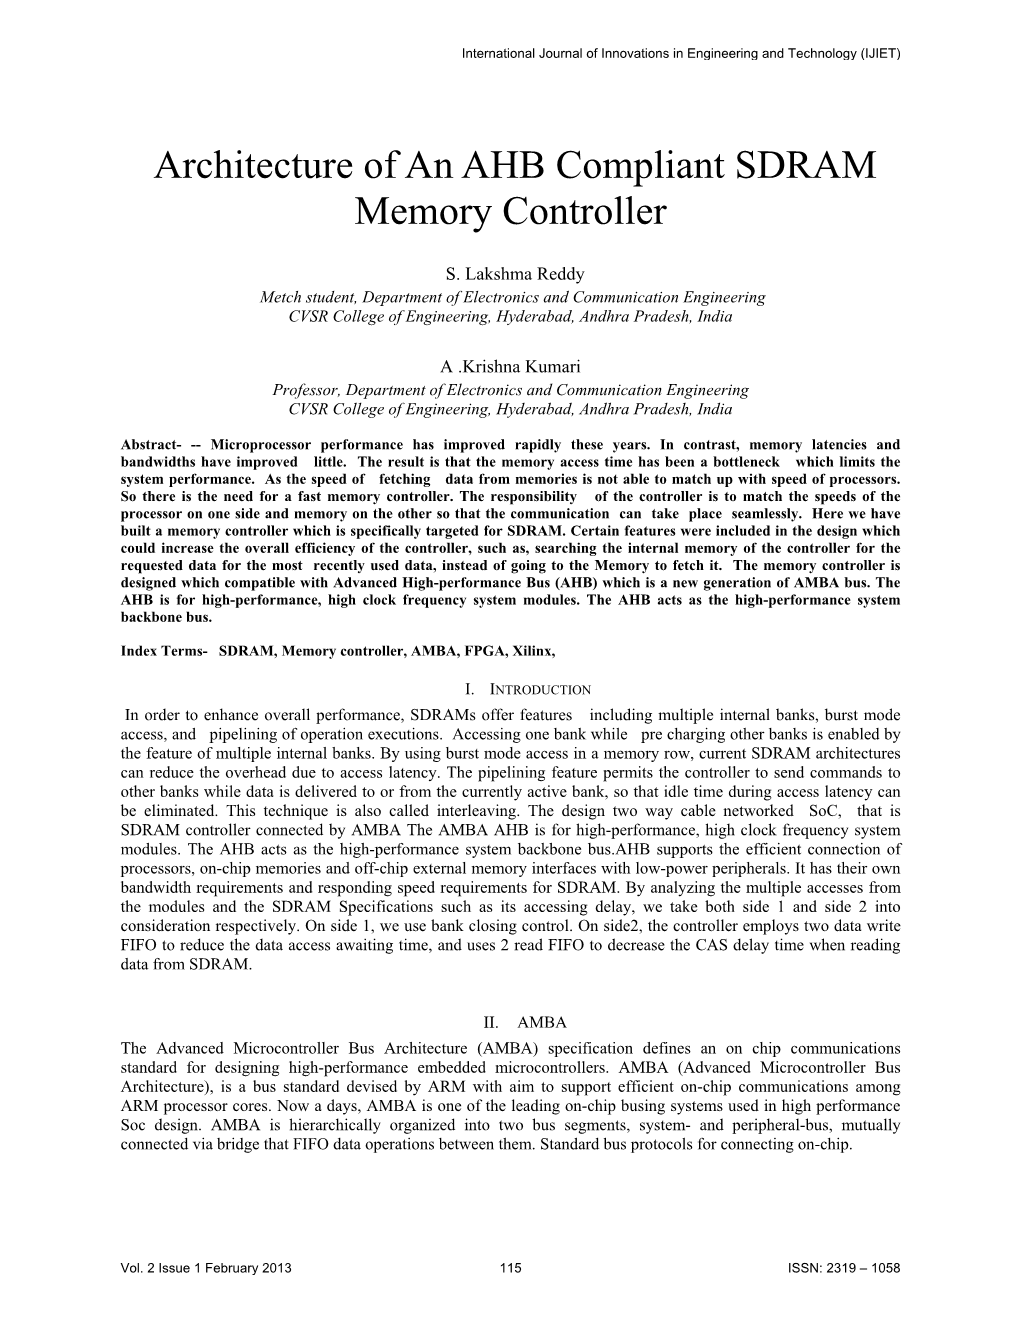 Architecture of an AHB Compliant SDRAM Memory Controller